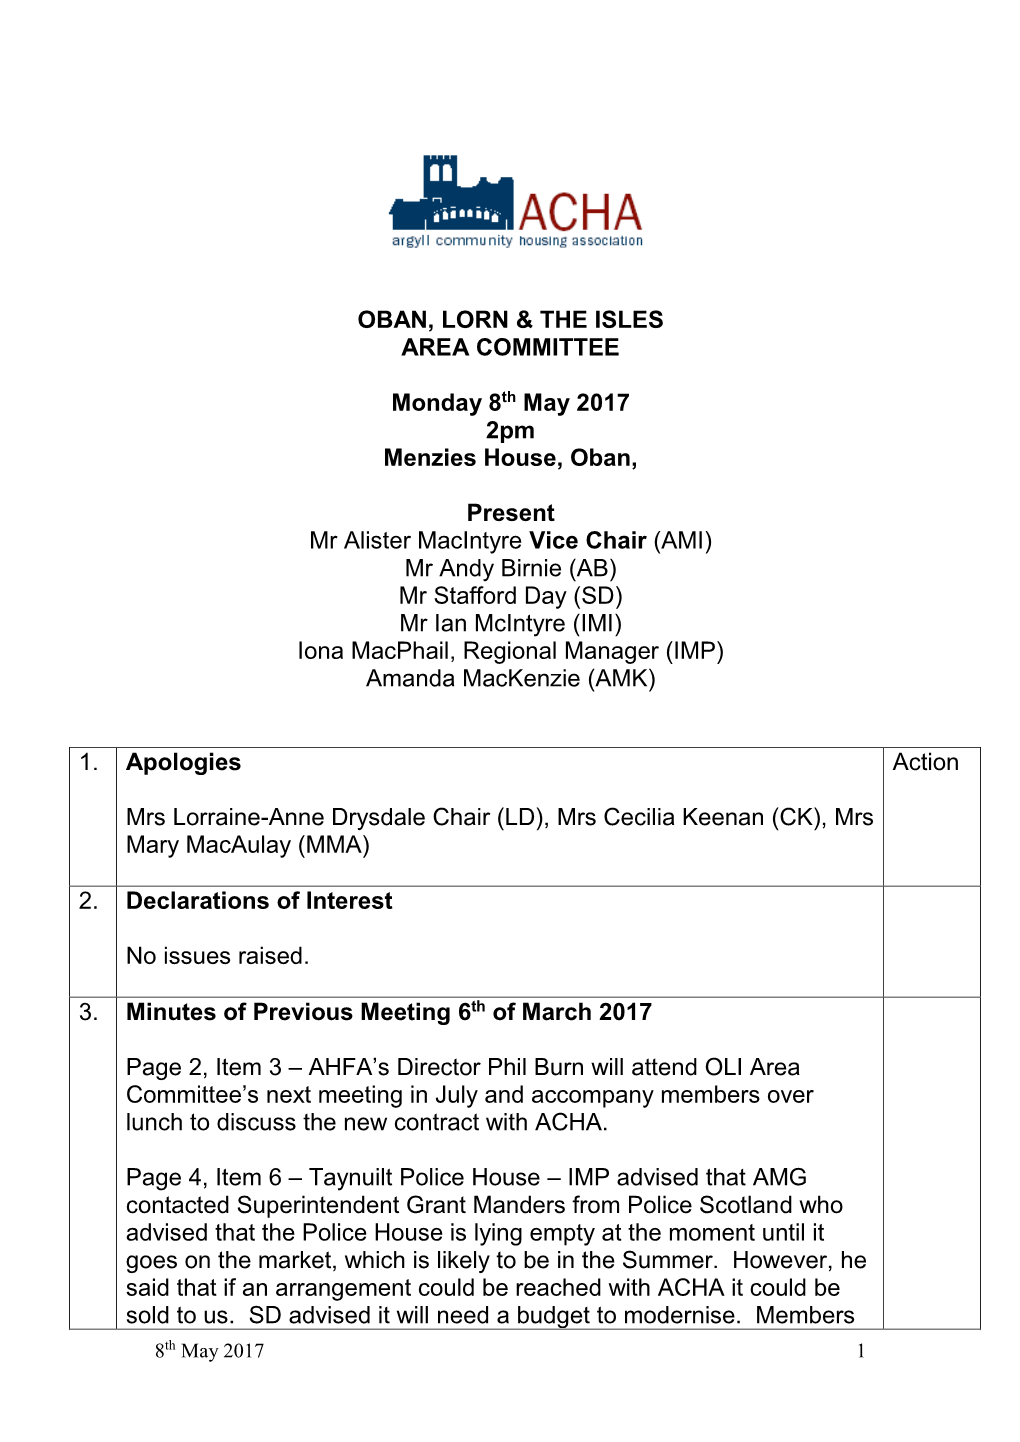 OBAN, LORN & the ISLES AREA COMMITTEE Monday 8Th May 2017